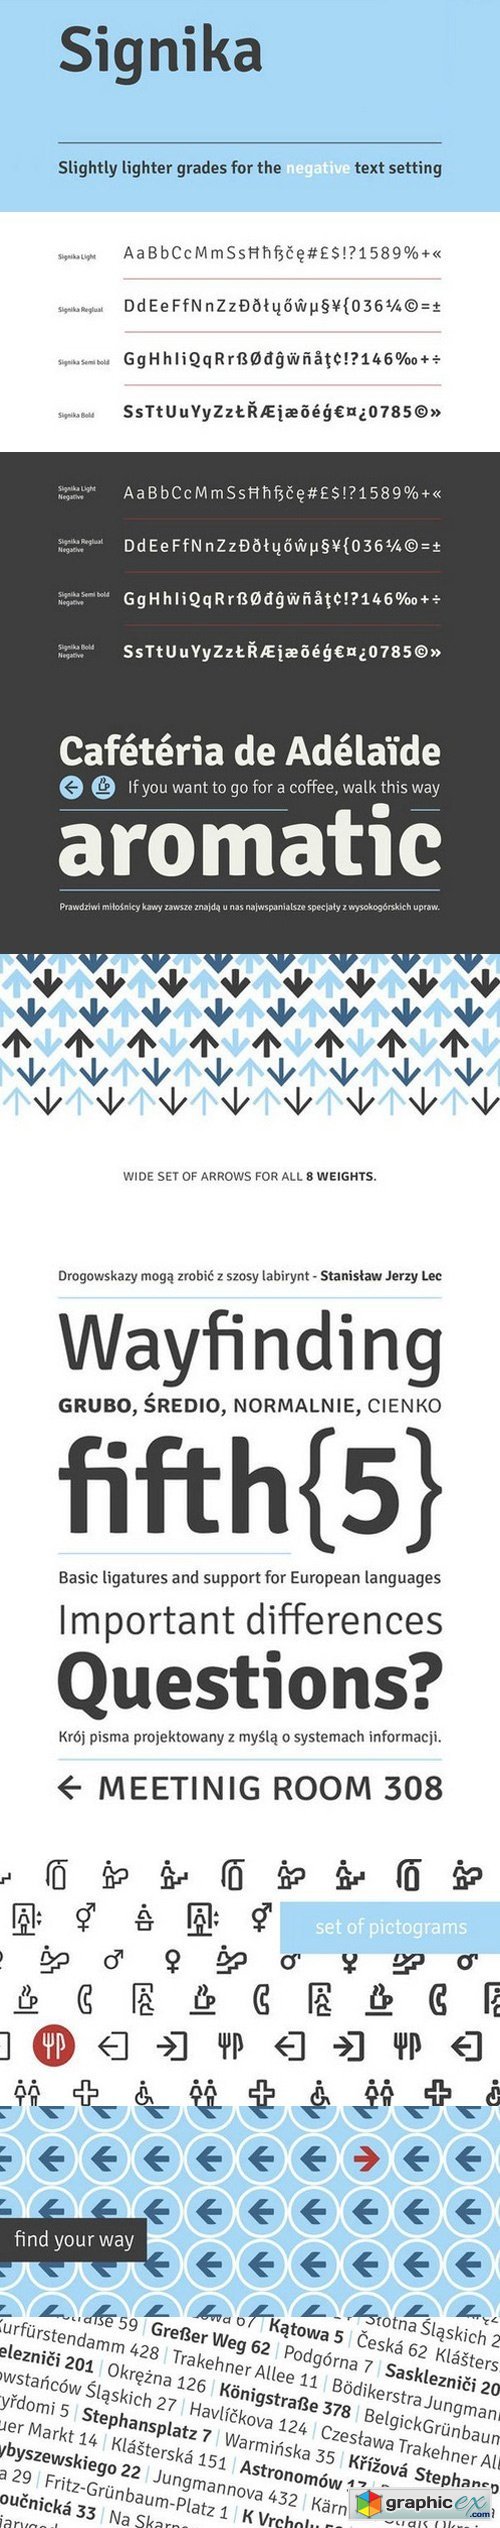 Sprightly Font